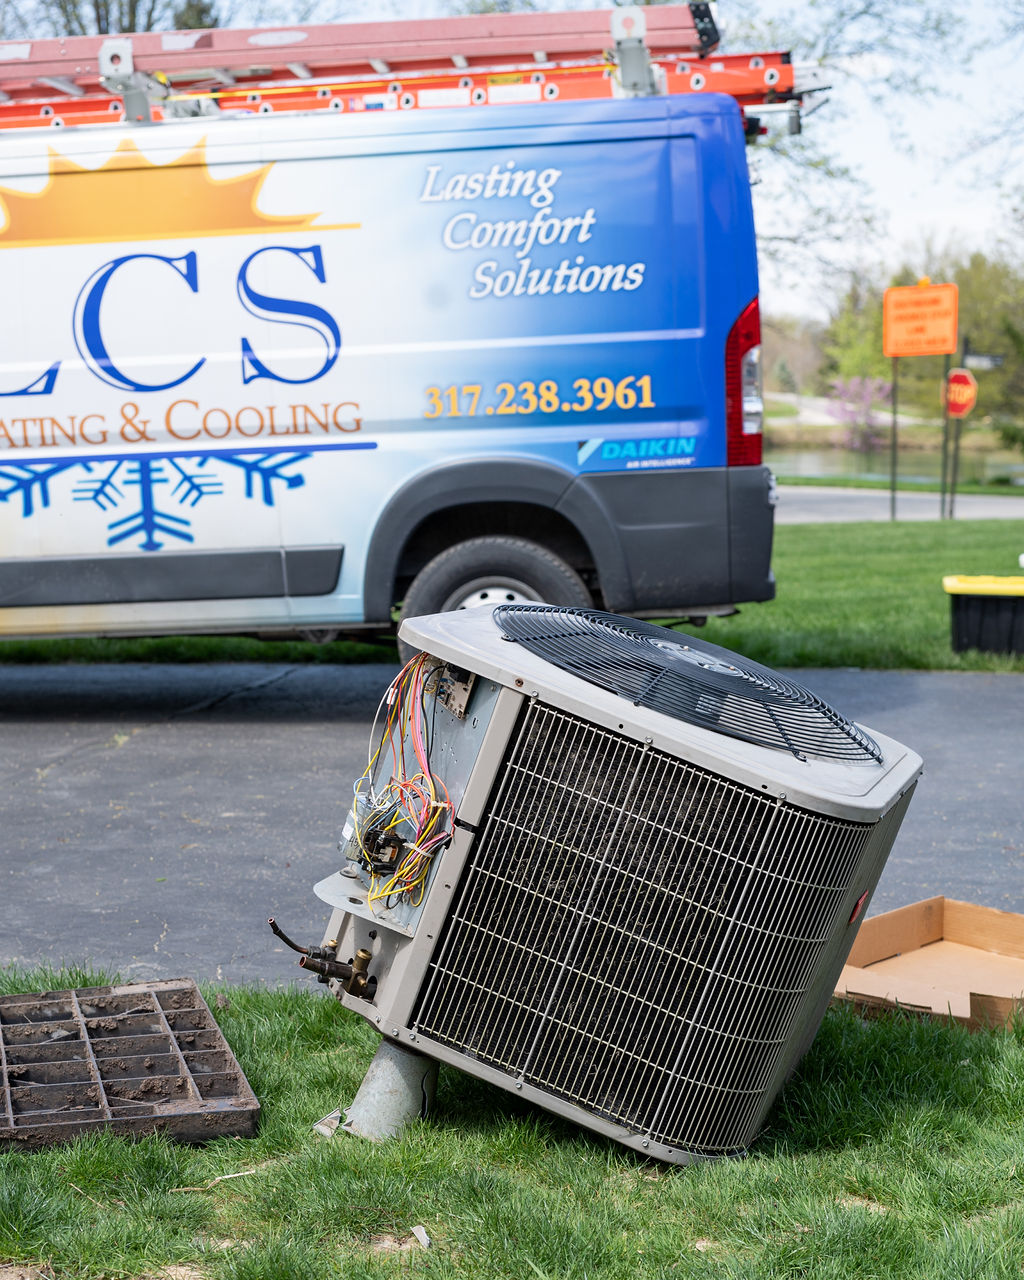 Old AC unit next to an LCS Heating and Cooling van scheduled for replacement hvac